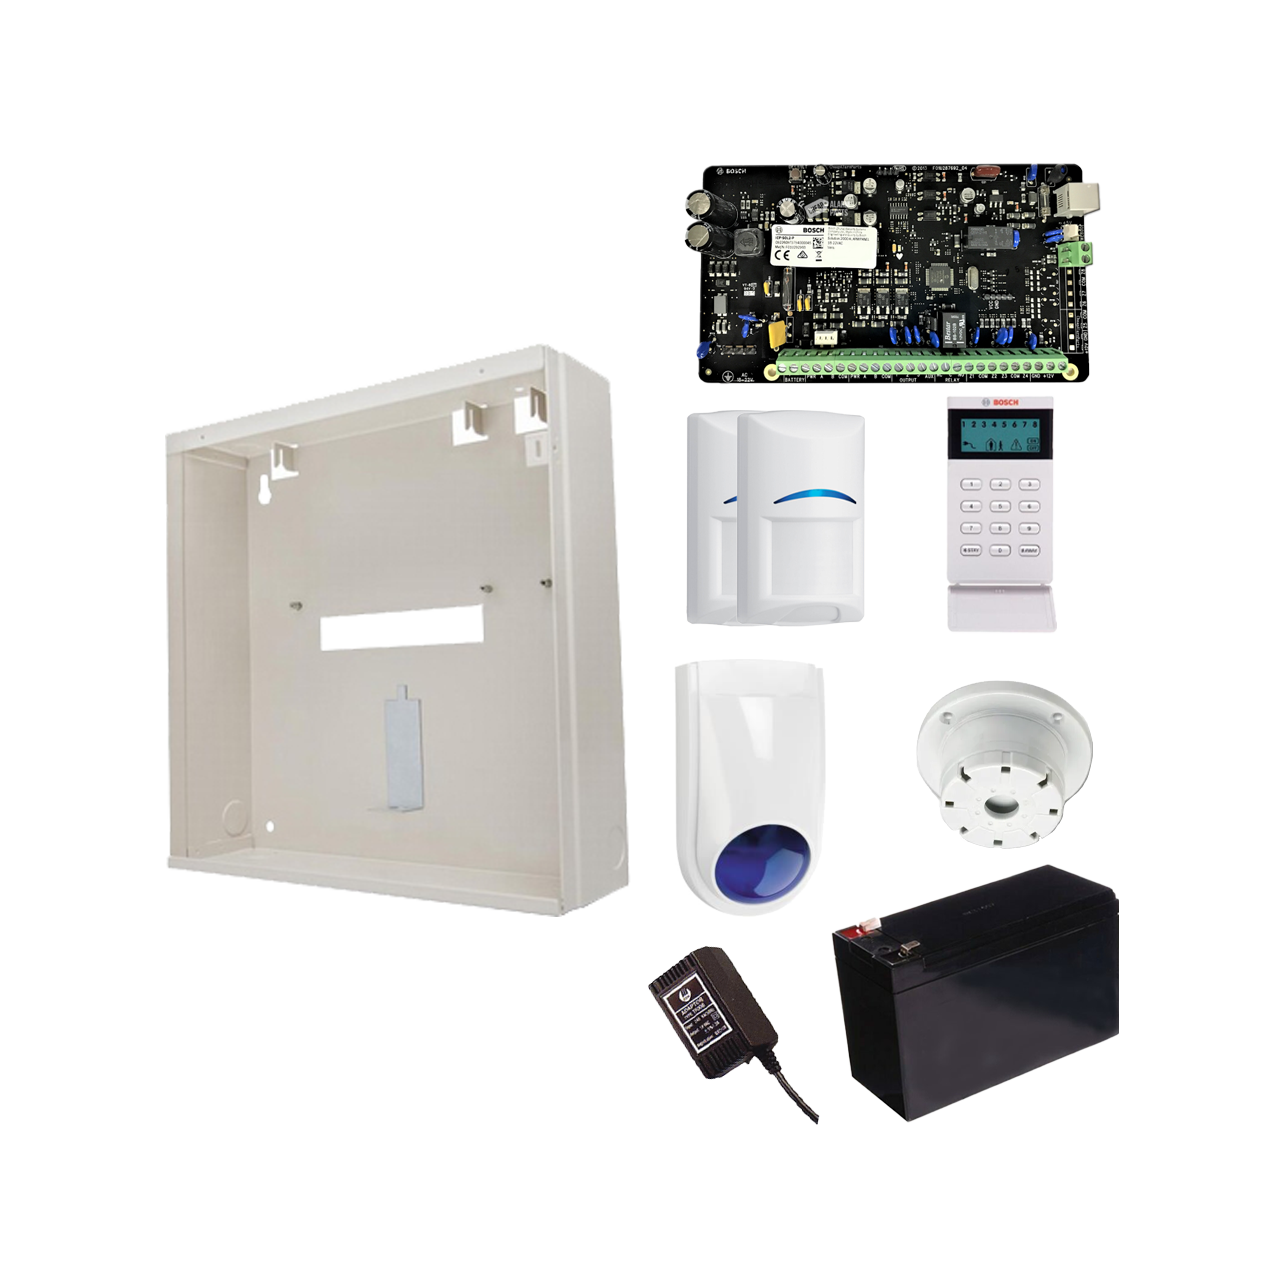 BOSCH KIT S2K-LCD-TRI-2 SOLUTION 2000 METAL ENCLOSURE WITH 2 x TRITECH + ICON CODEPAD + BOSCH7015